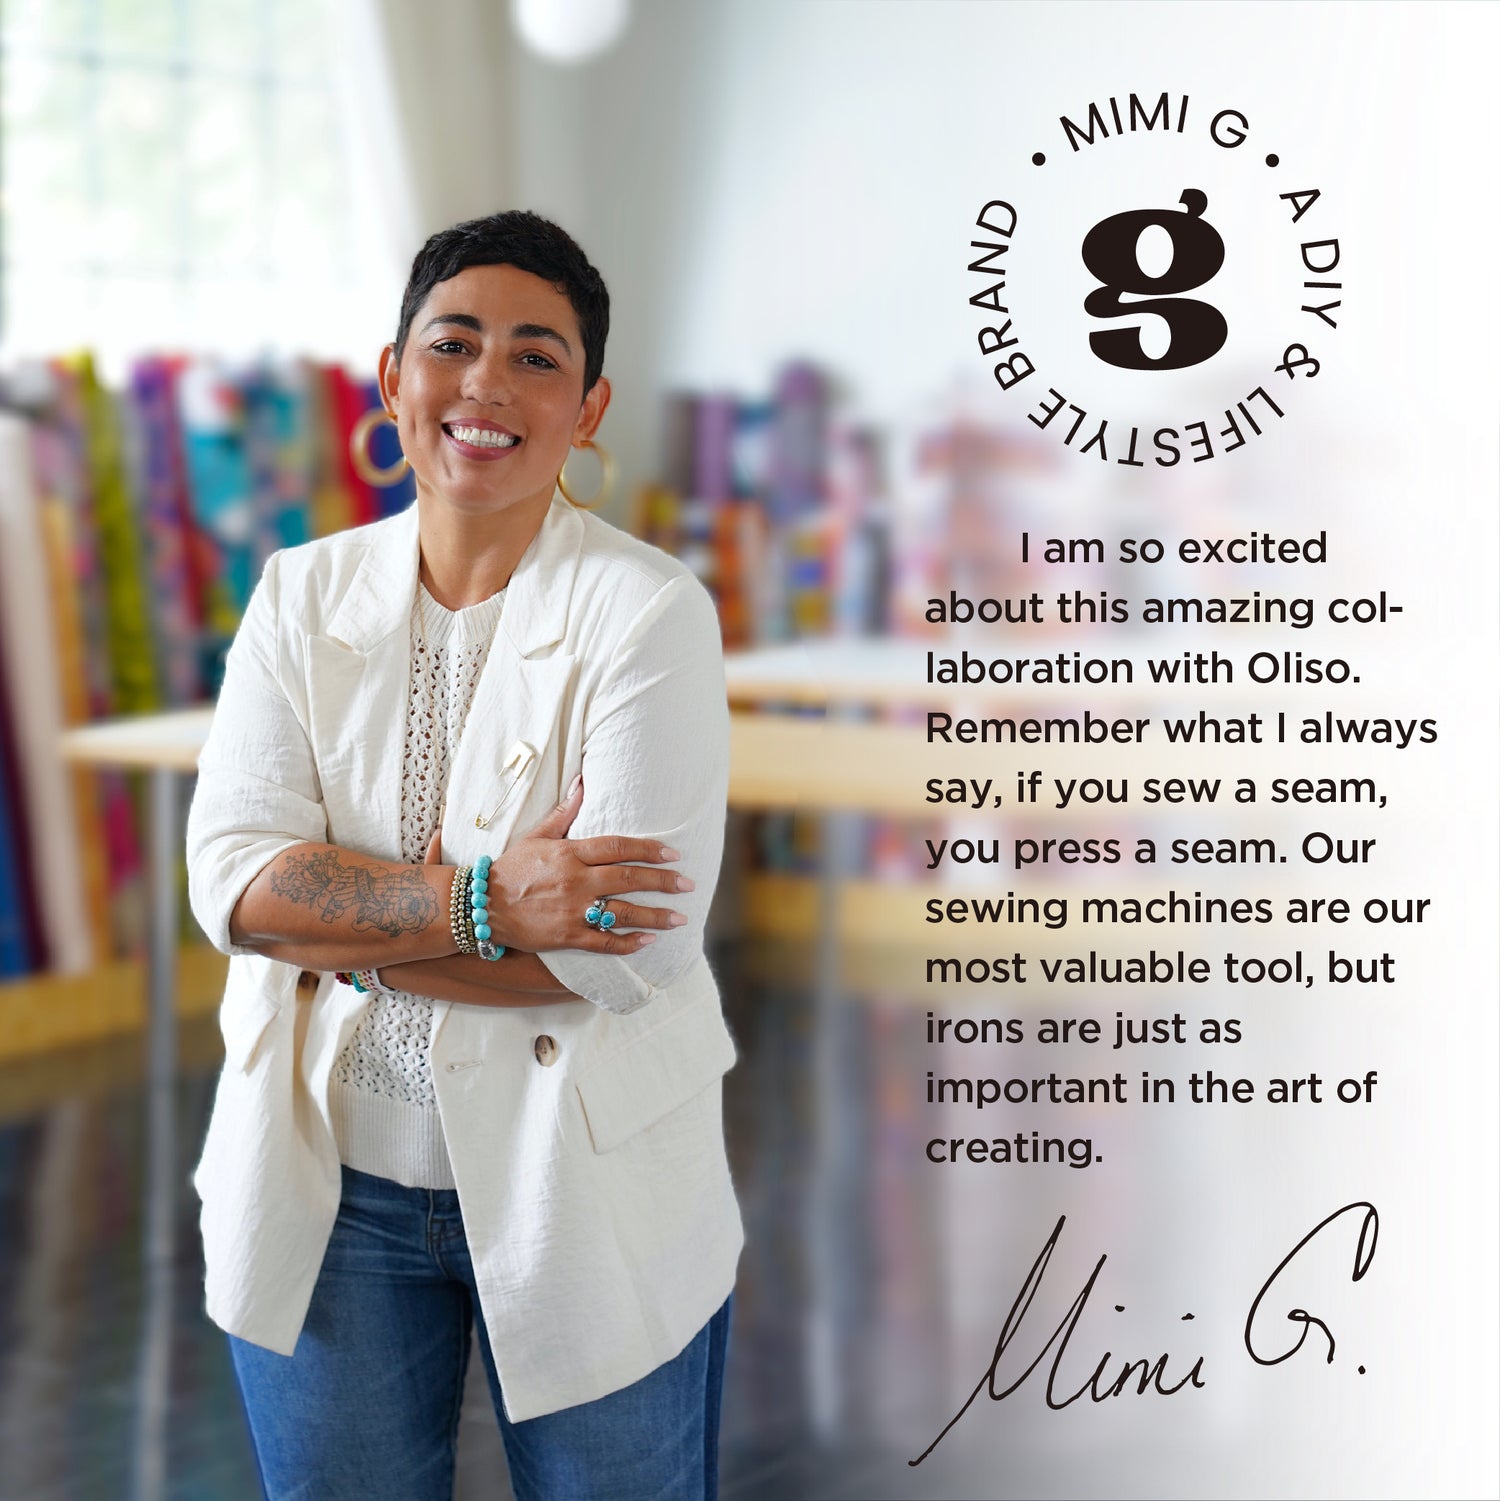 Mimi G in her studio  with her quote about the Mimi G iron. I am so excited about this amazing collaboration with Oliso. Remember  what I always say, if you sew a seam, you press a seam. Our sewing machines are out most valuable tool, but irons are just as important in the art of creating. Mimi G.